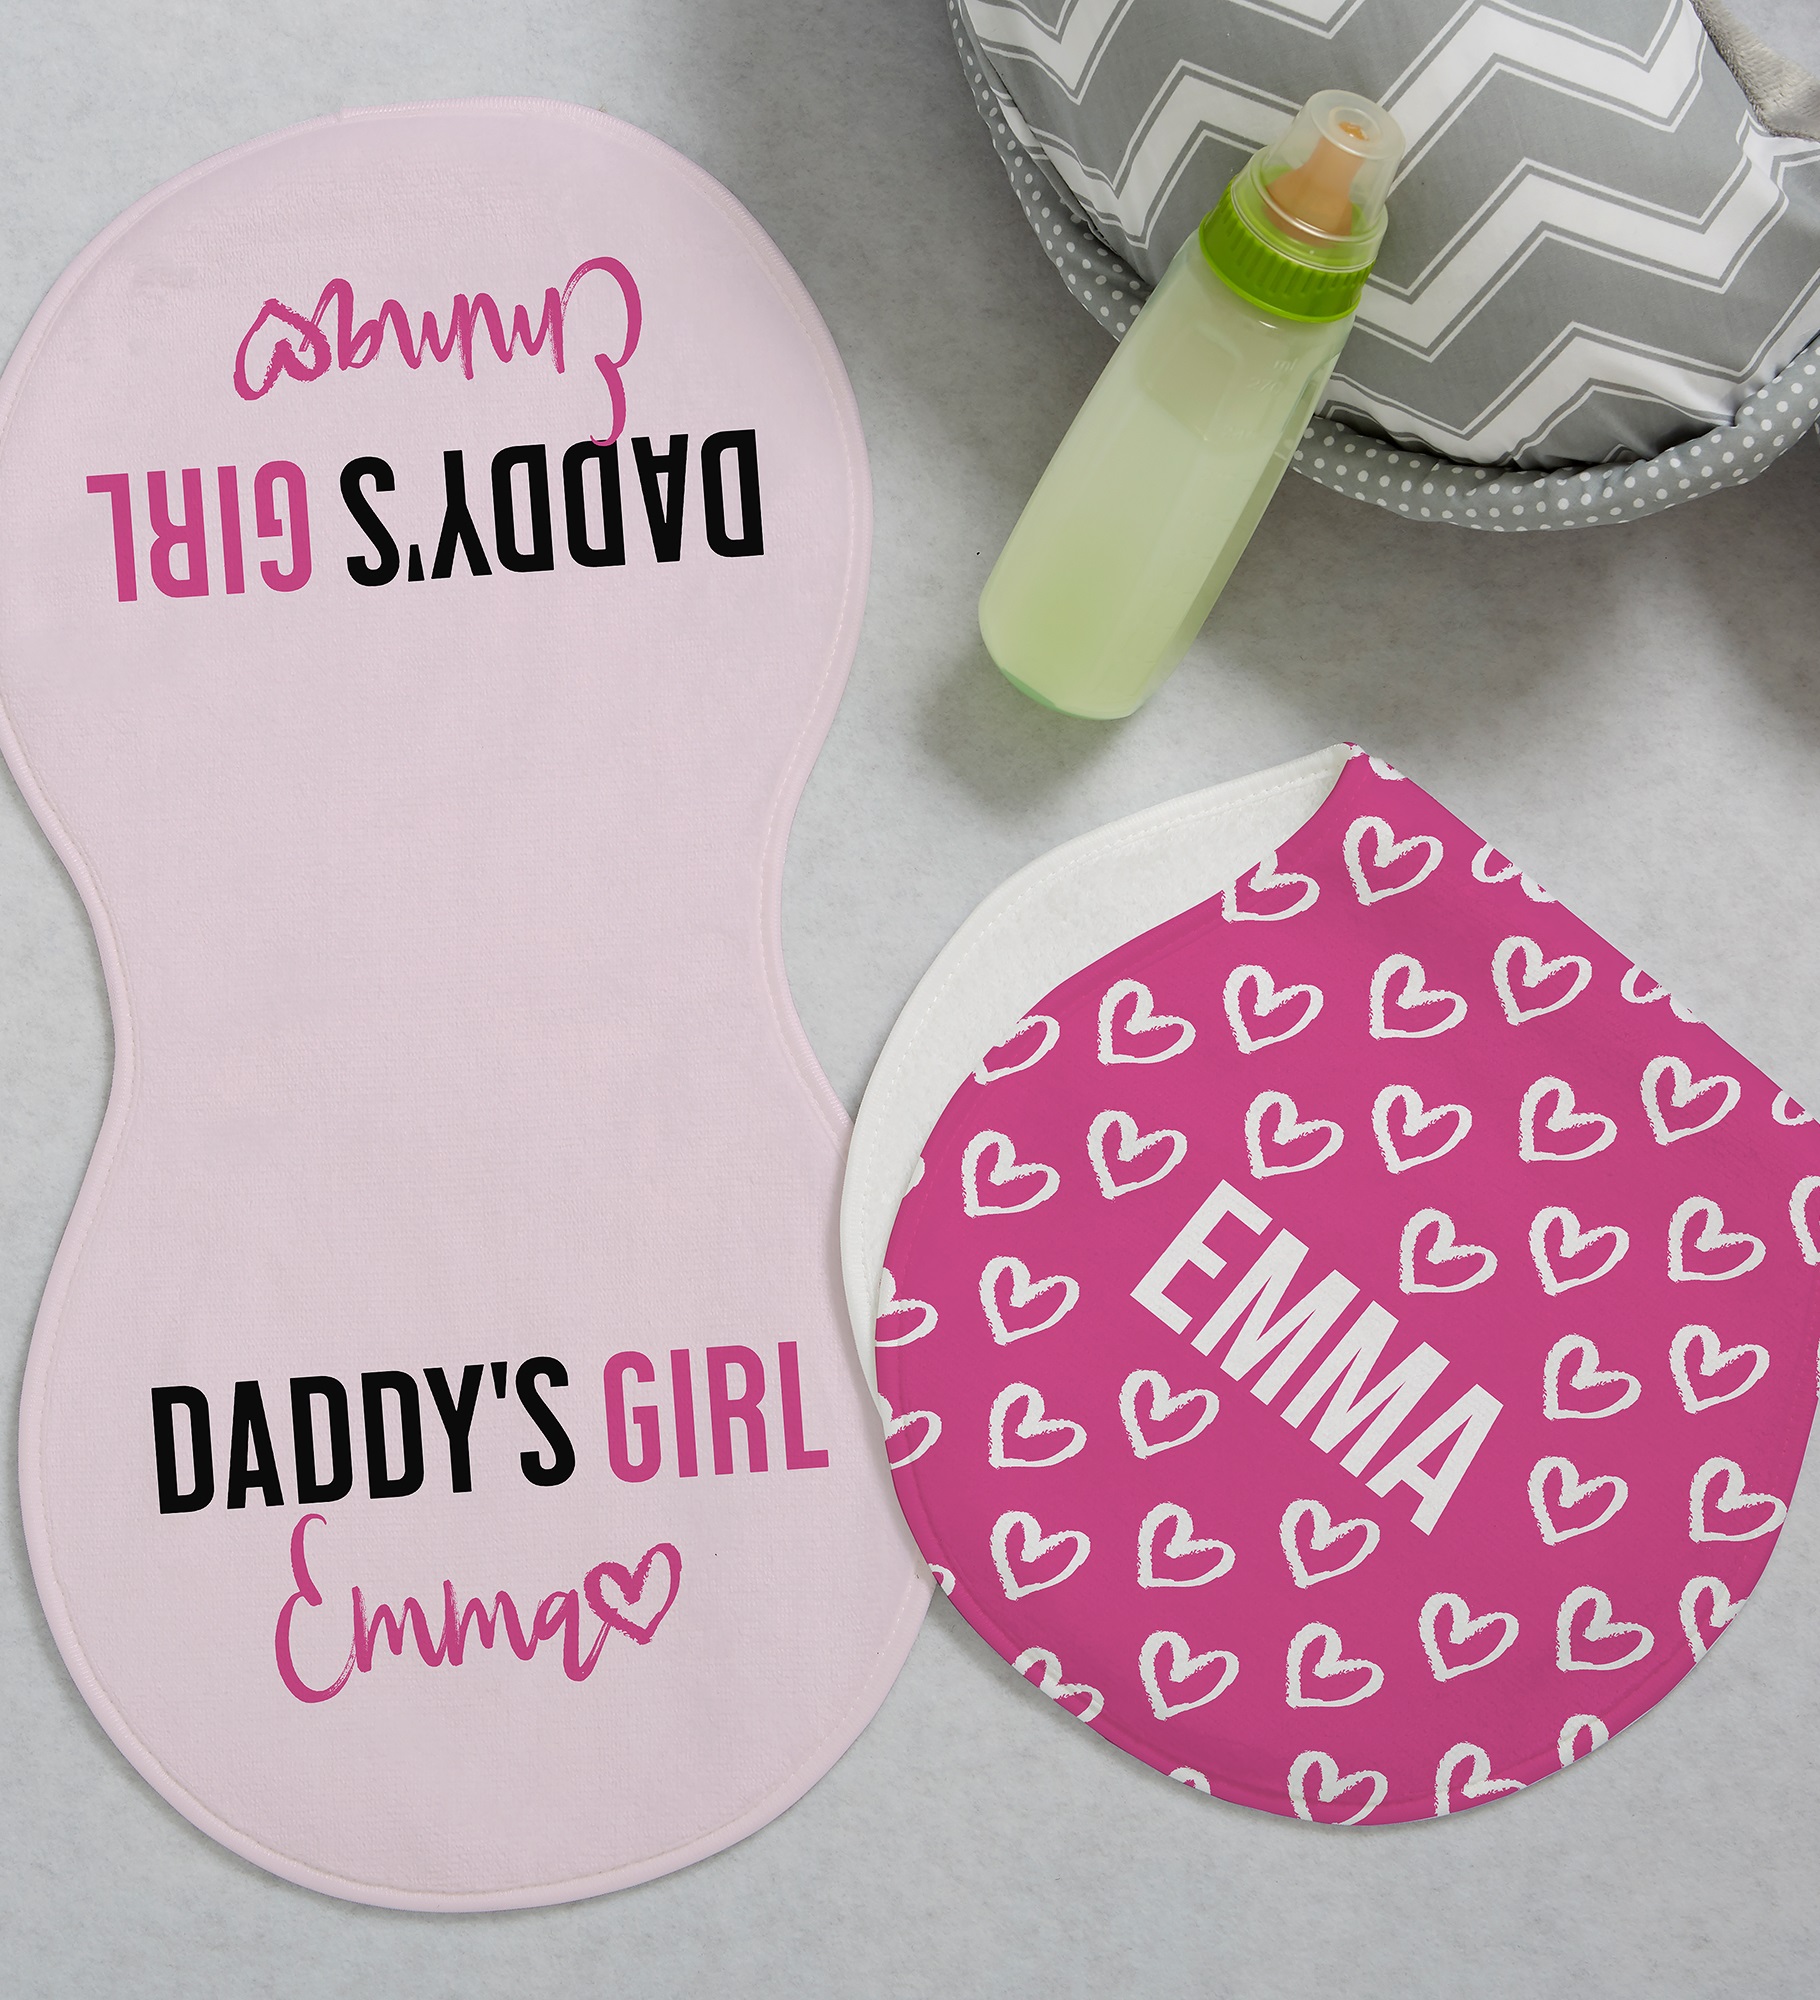 Daddy's Girl Personalized Burp Cloths - Set of 2